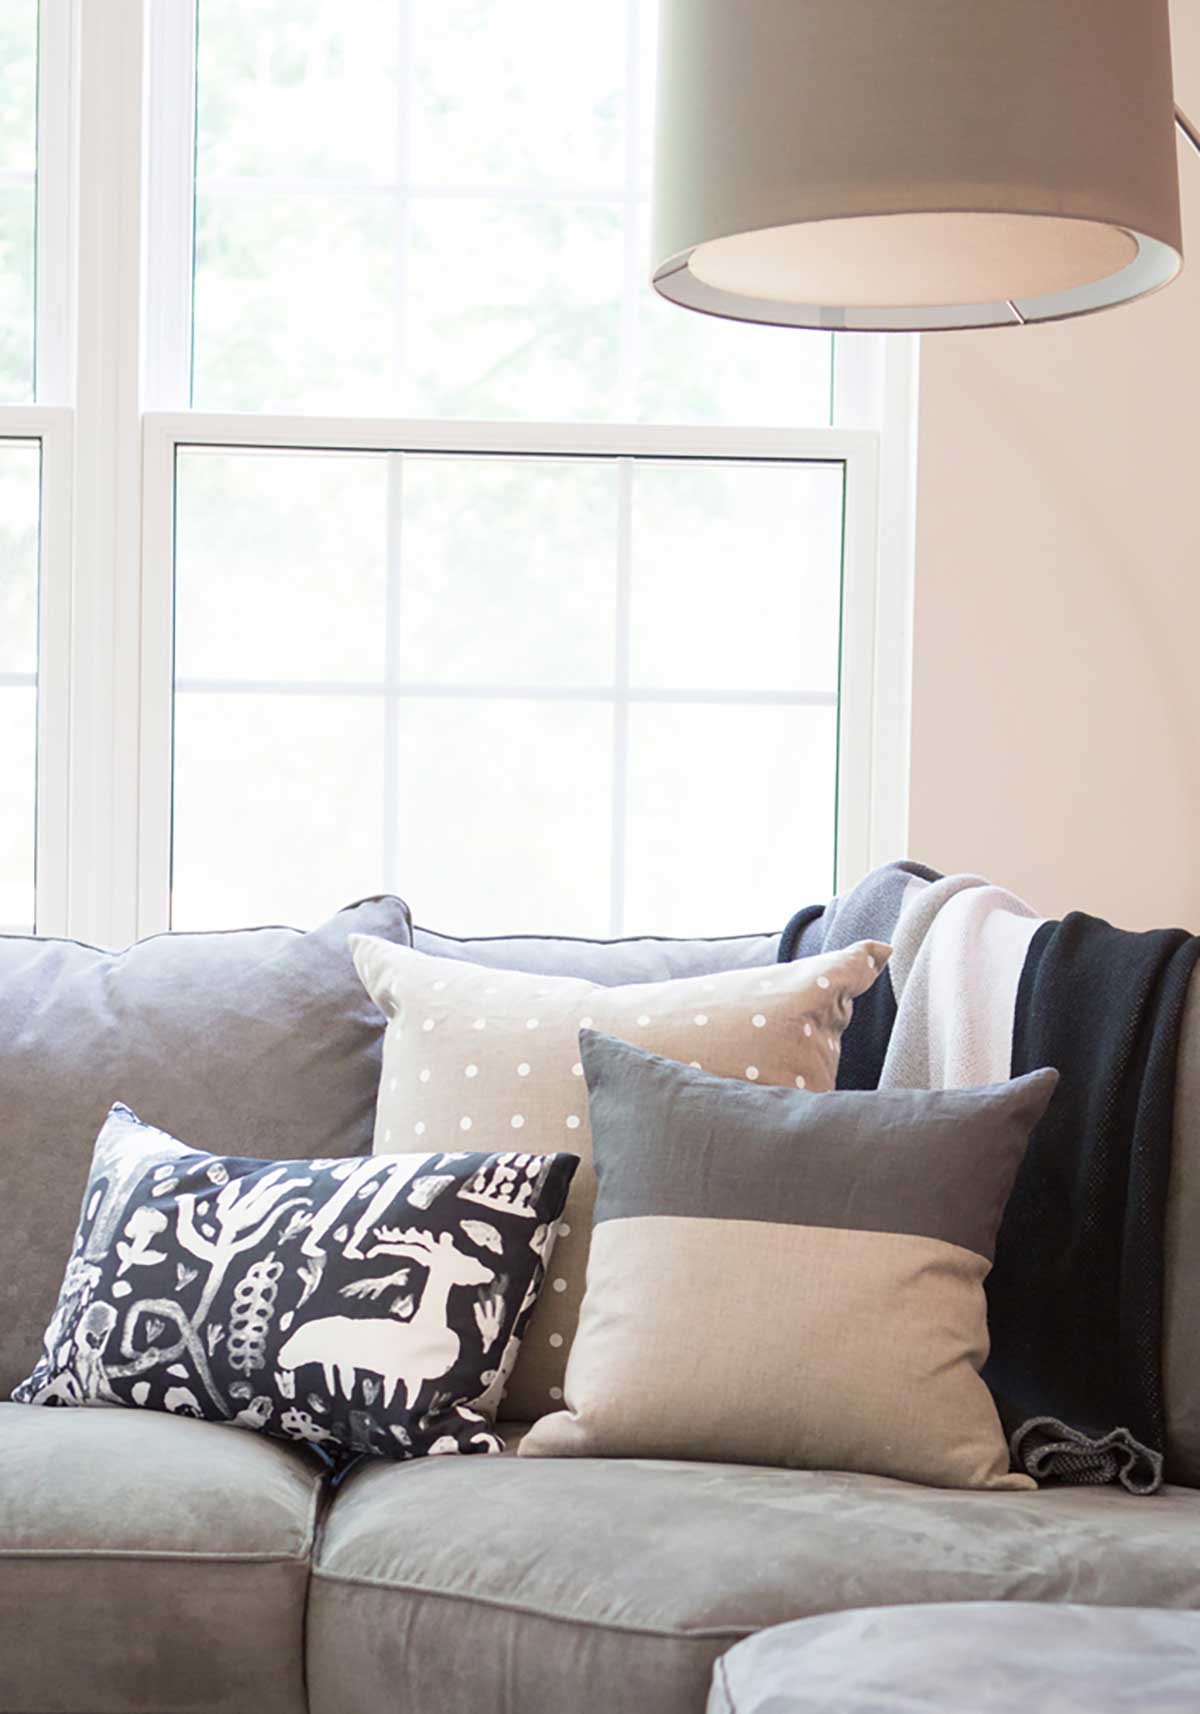 Pillow Styling - mixing and matching patterns that work in my living room